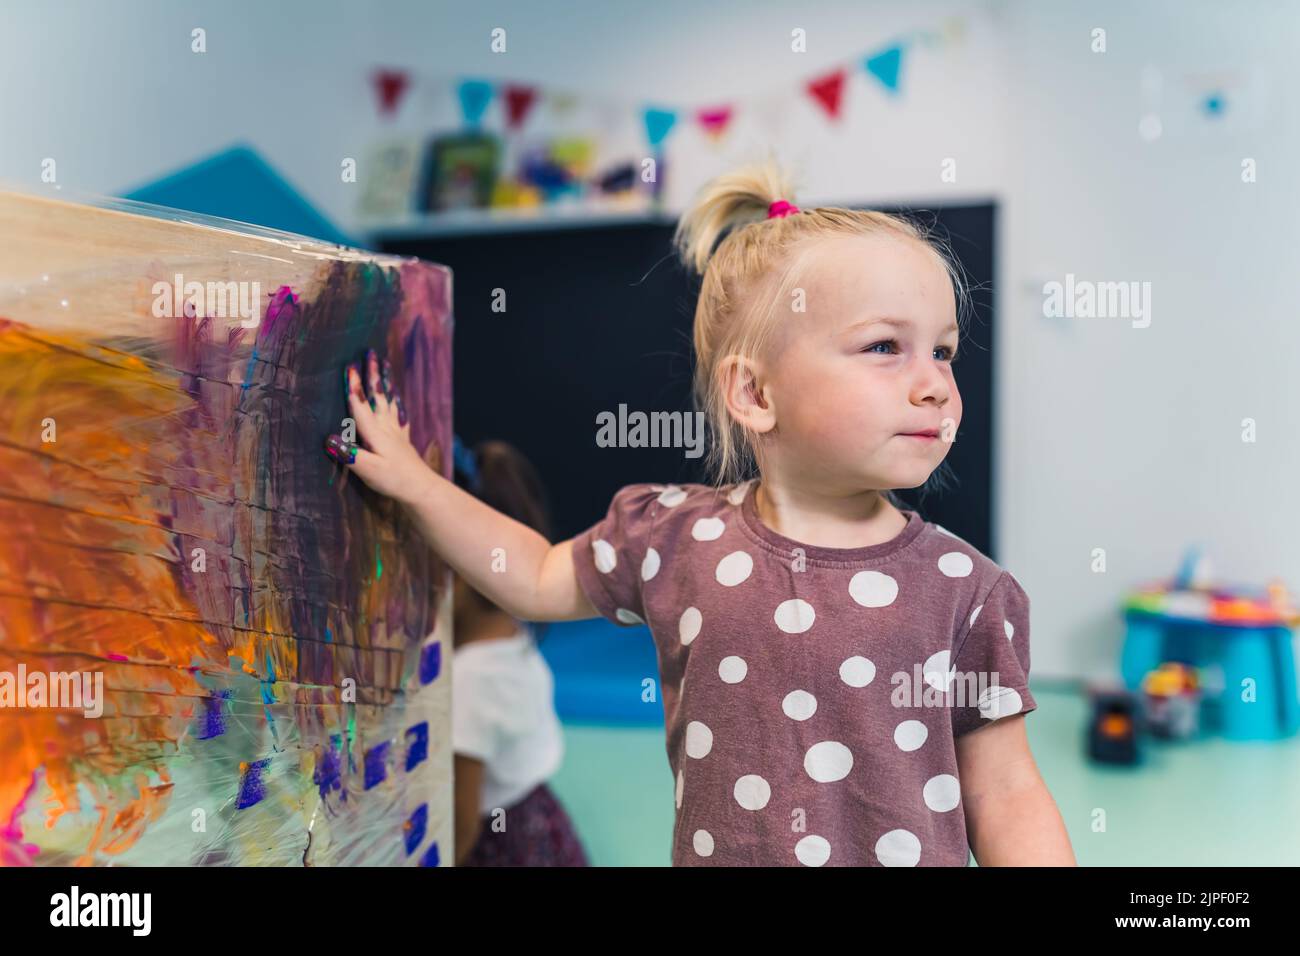 Nursery school. Happy caucasian blonde toddler girl finger painting on a cling film wrapped around the shelving stand as an easel. Fun art activity for kids sensory skills, creativity and imagination development . High quality photo Stock Photo